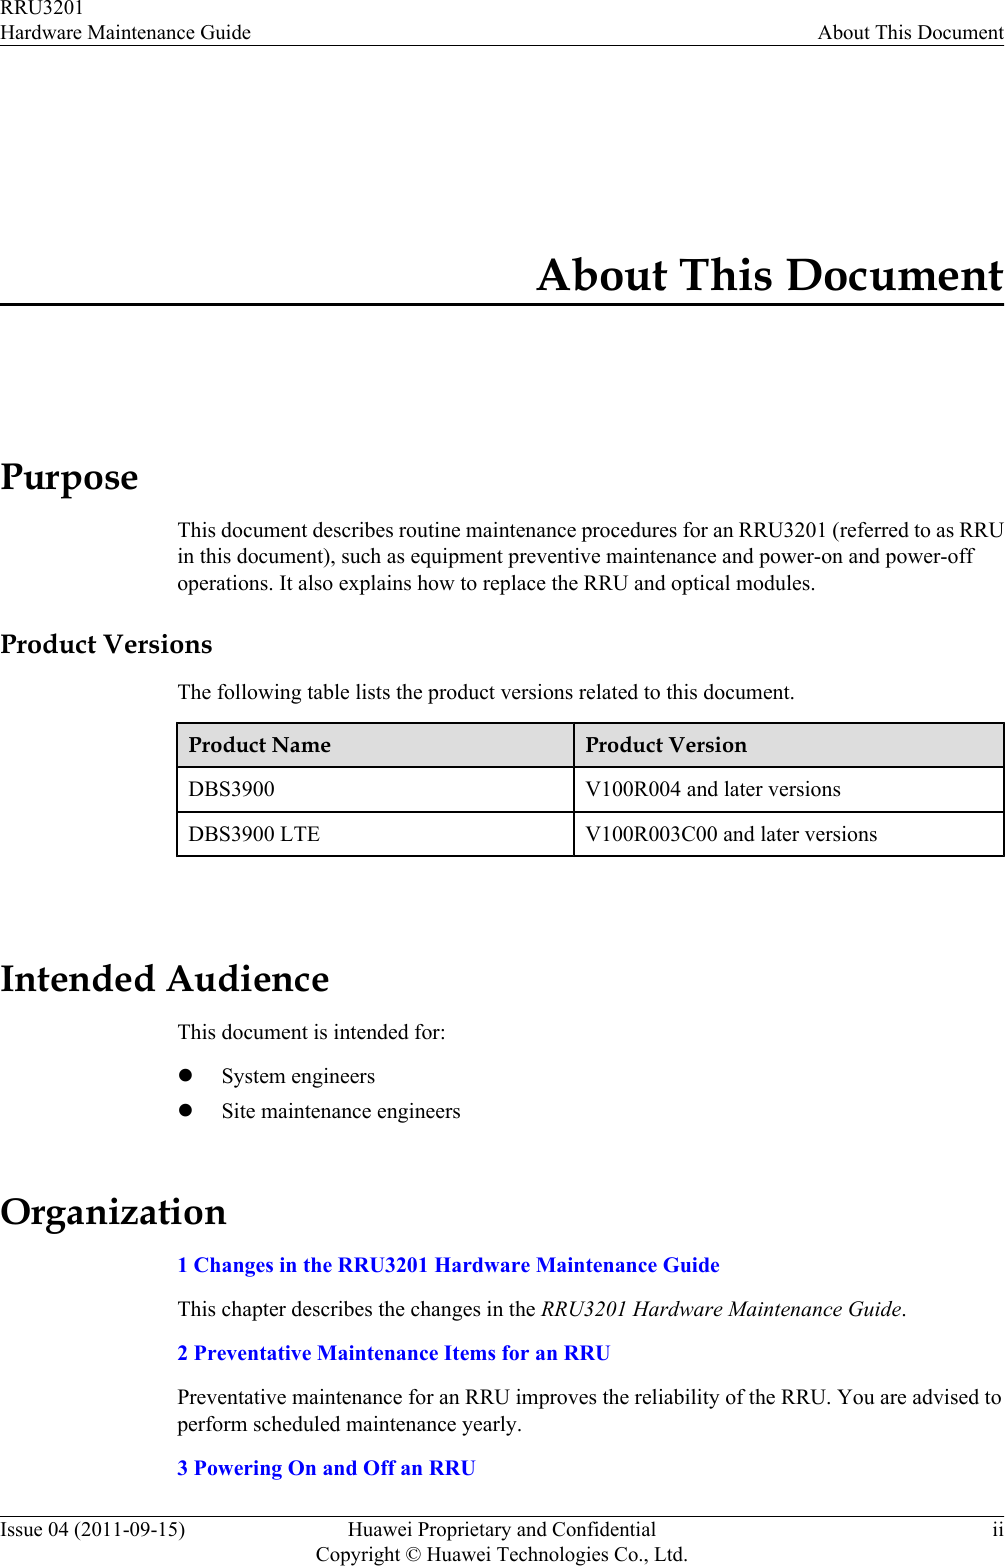 About This DocumentPurposeThis document describes routine maintenance procedures for an RRU3201 (referred to as RRUin this document), such as equipment preventive maintenance and power-on and power-offoperations. It also explains how to replace the RRU and optical modules.Product VersionsThe following table lists the product versions related to this document.Product Name Product VersionDBS3900 V100R004 and later versionsDBS3900 LTE V100R003C00 and later versions Intended AudienceThis document is intended for:lSystem engineerslSite maintenance engineersOrganization1 Changes in the RRU3201 Hardware Maintenance GuideThis chapter describes the changes in the RRU3201 Hardware Maintenance Guide.2 Preventative Maintenance Items for an RRUPreventative maintenance for an RRU improves the reliability of the RRU. You are advised toperform scheduled maintenance yearly.3 Powering On and Off an RRURRU3201Hardware Maintenance Guide About This DocumentIssue 04 (2011-09-15) Huawei Proprietary and ConfidentialCopyright © Huawei Technologies Co., Ltd.ii